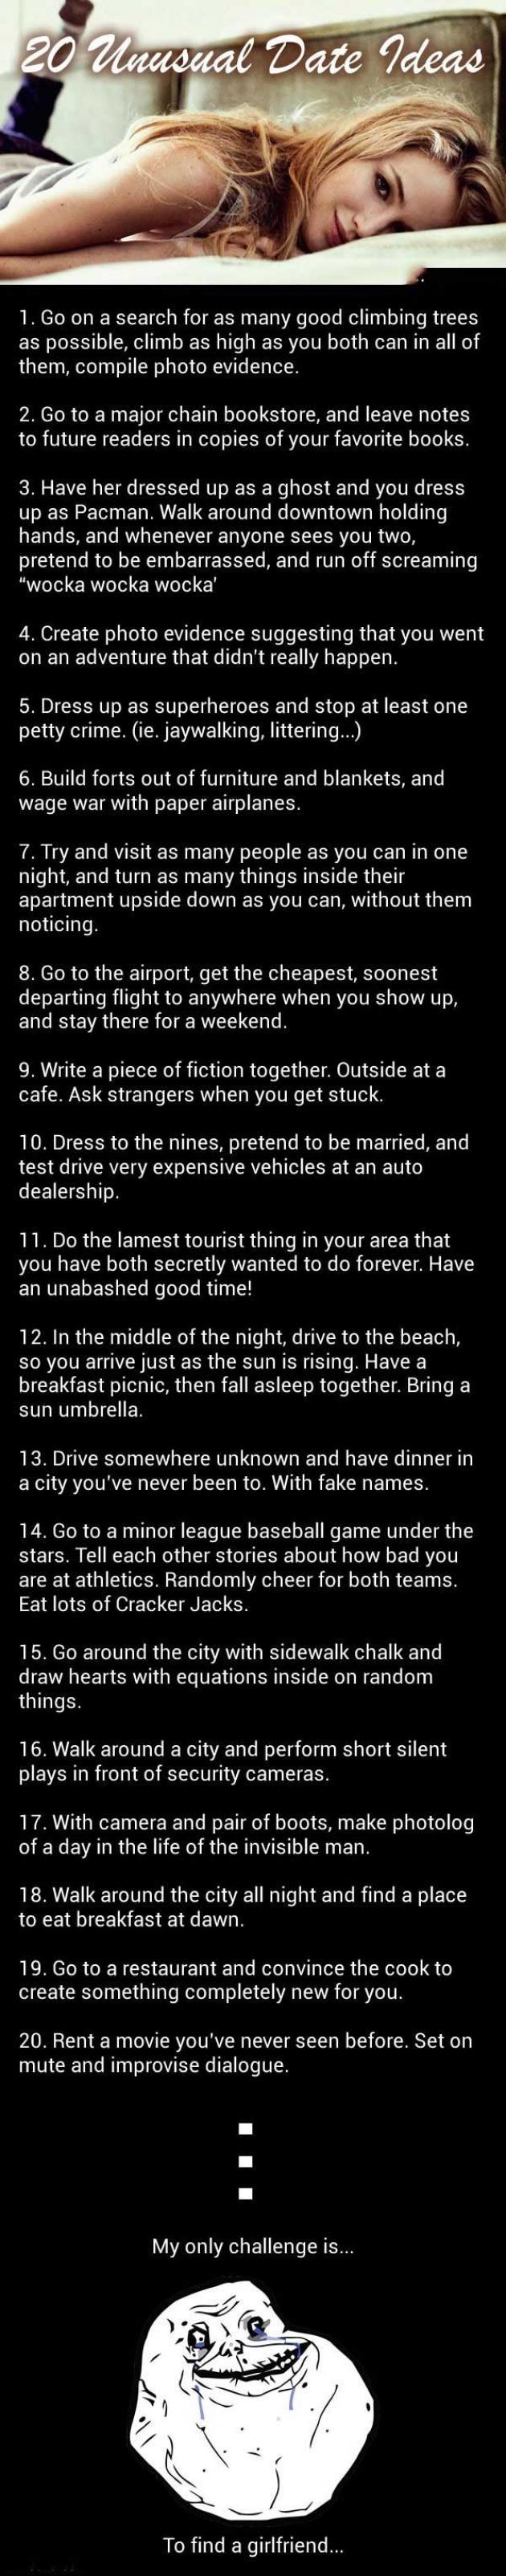 20 Unusual But Awesome Date Ideas